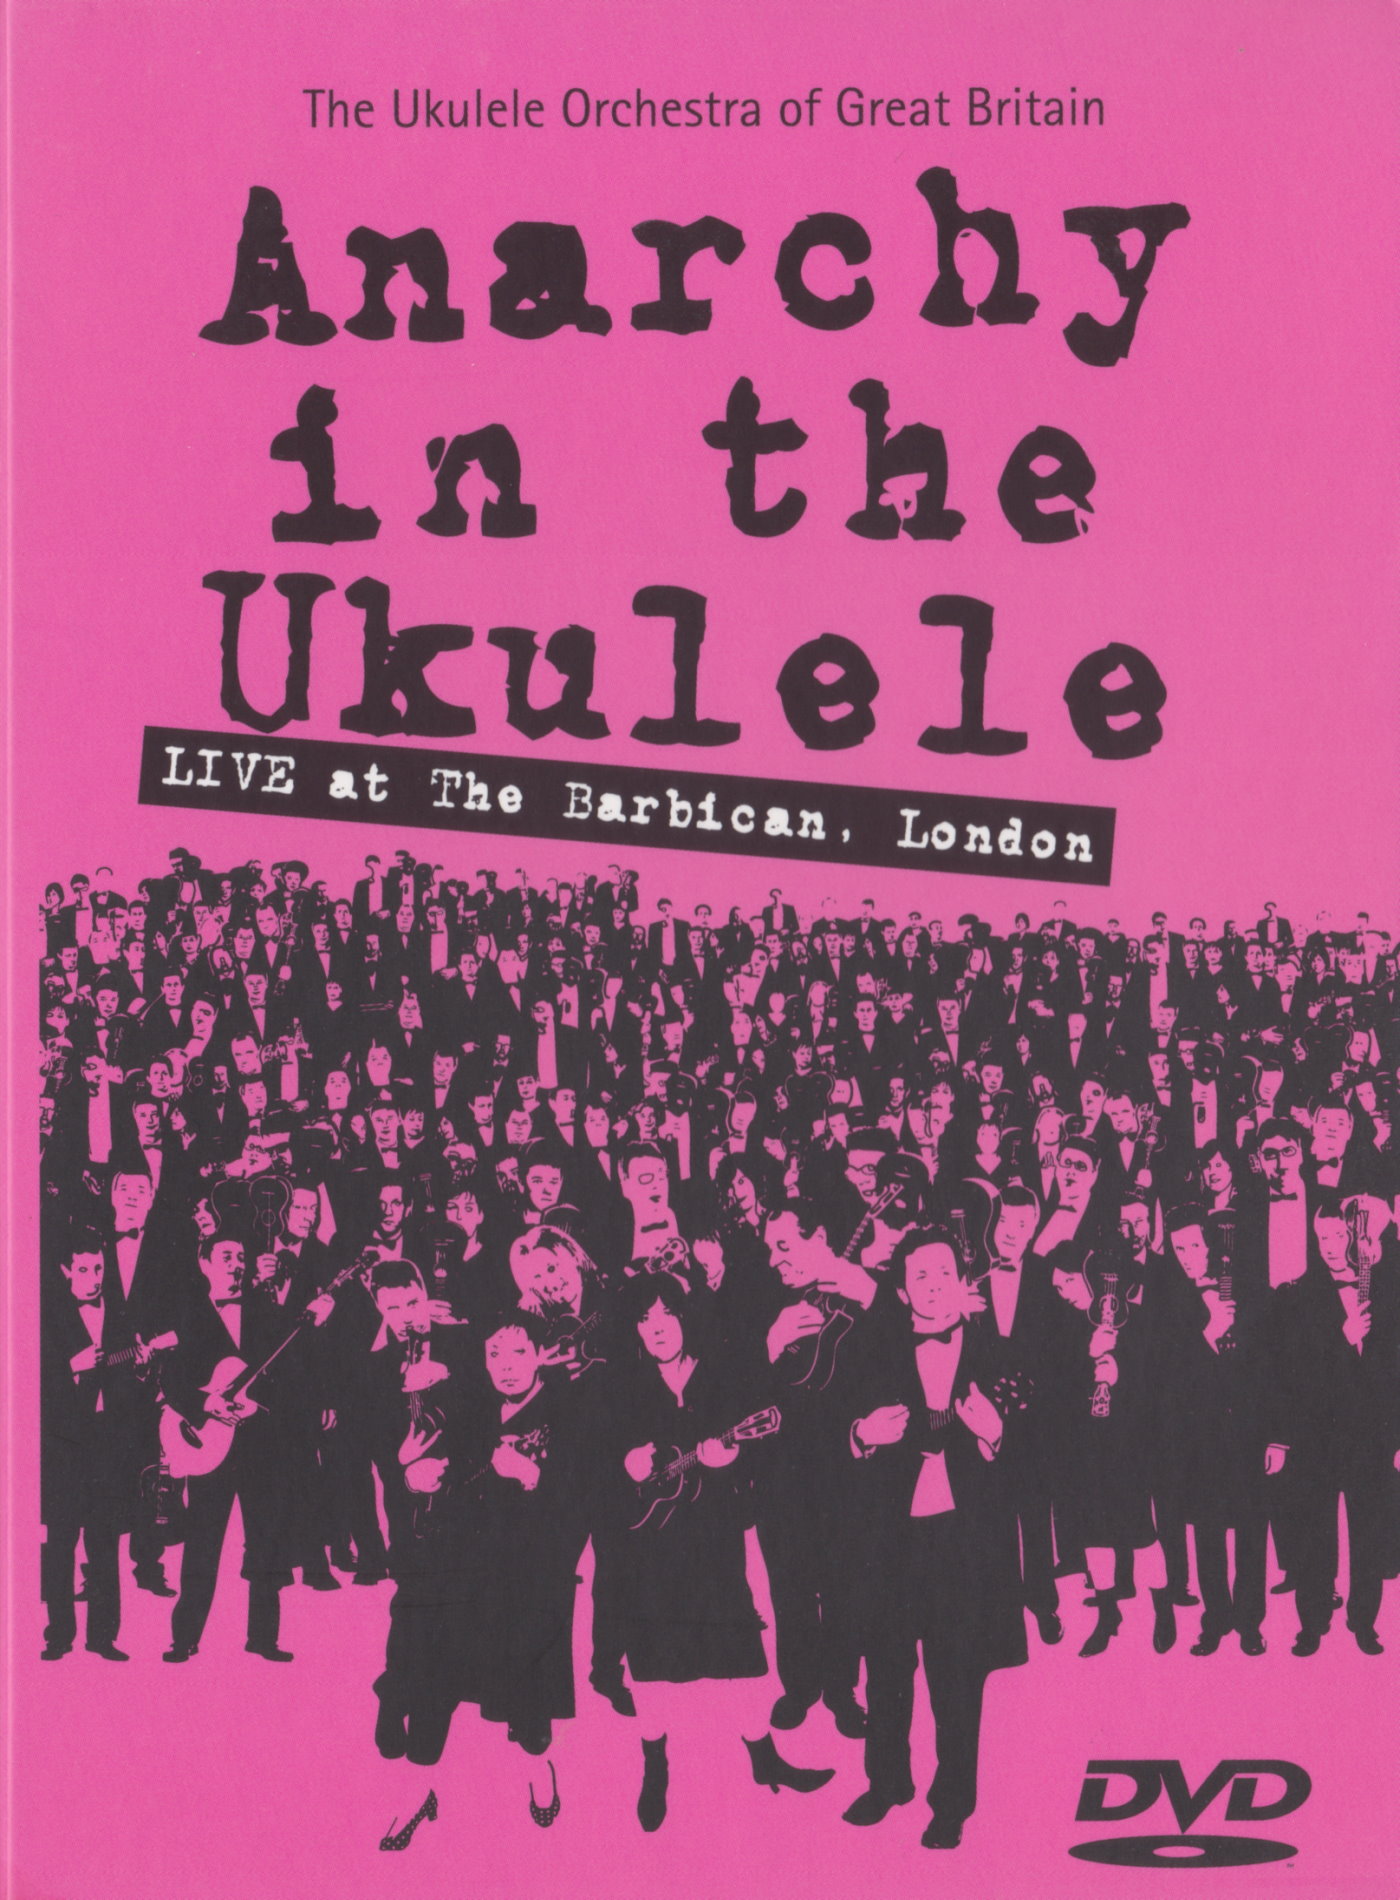 Cover - The Ukulele Orchestra of Great Britain - Anarchy in the Ukulele.jpg